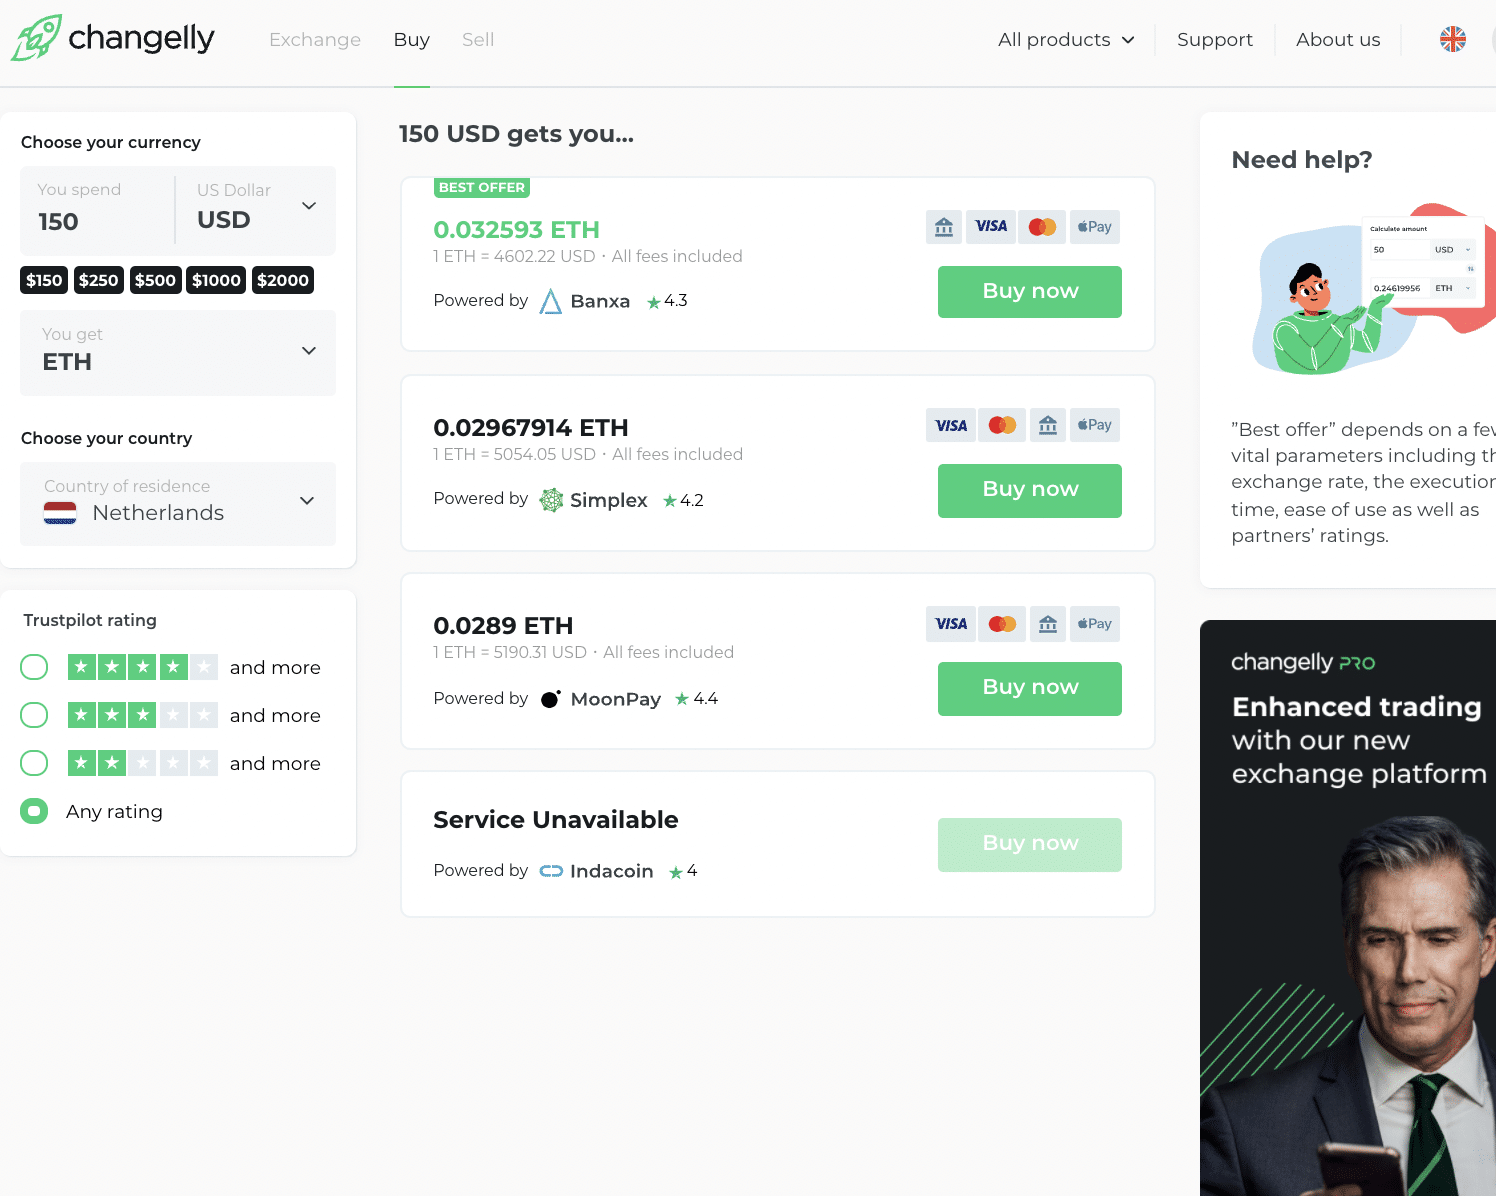 Changelly PRO trade volume and market listings | CoinMarketCap